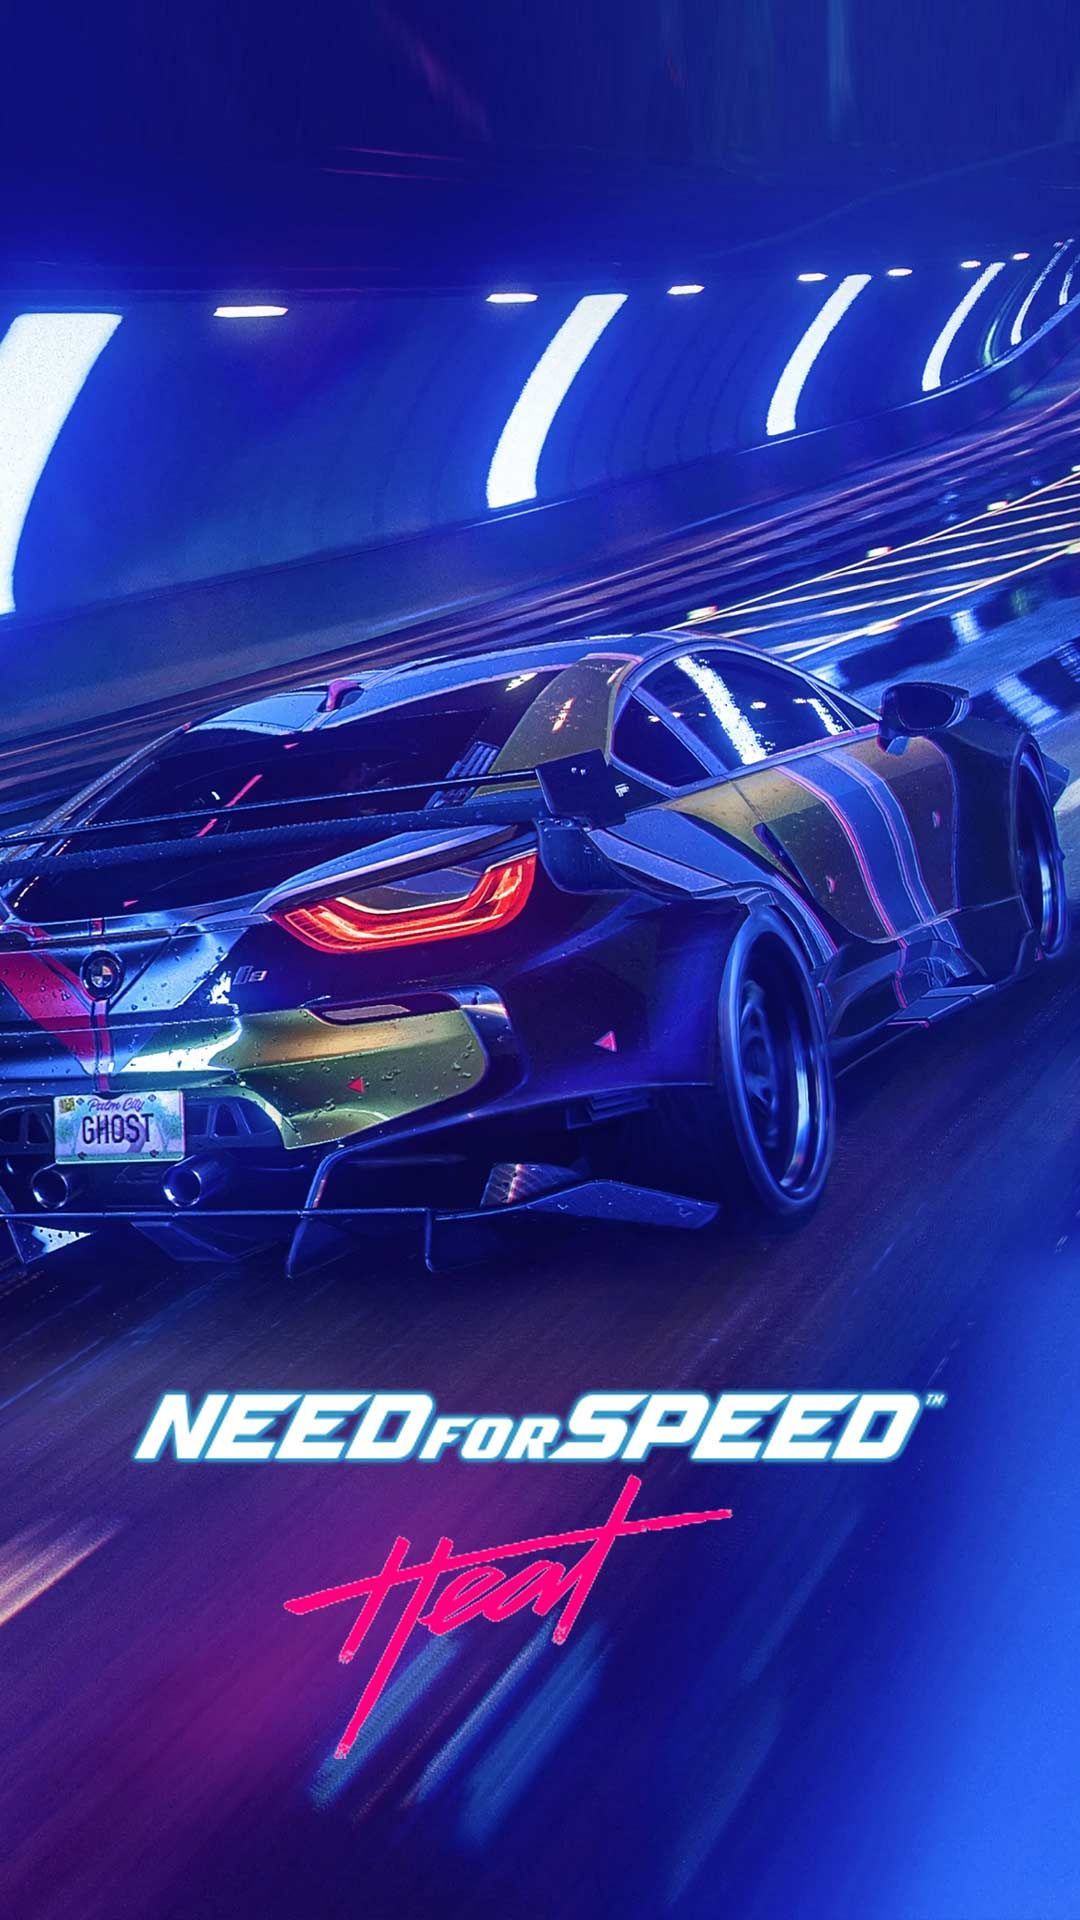 Need for speed heat wallpaper HD phone background Cars Poster art on iPhone android lock screen. Need for speed cars, HD phone background, Need for speed